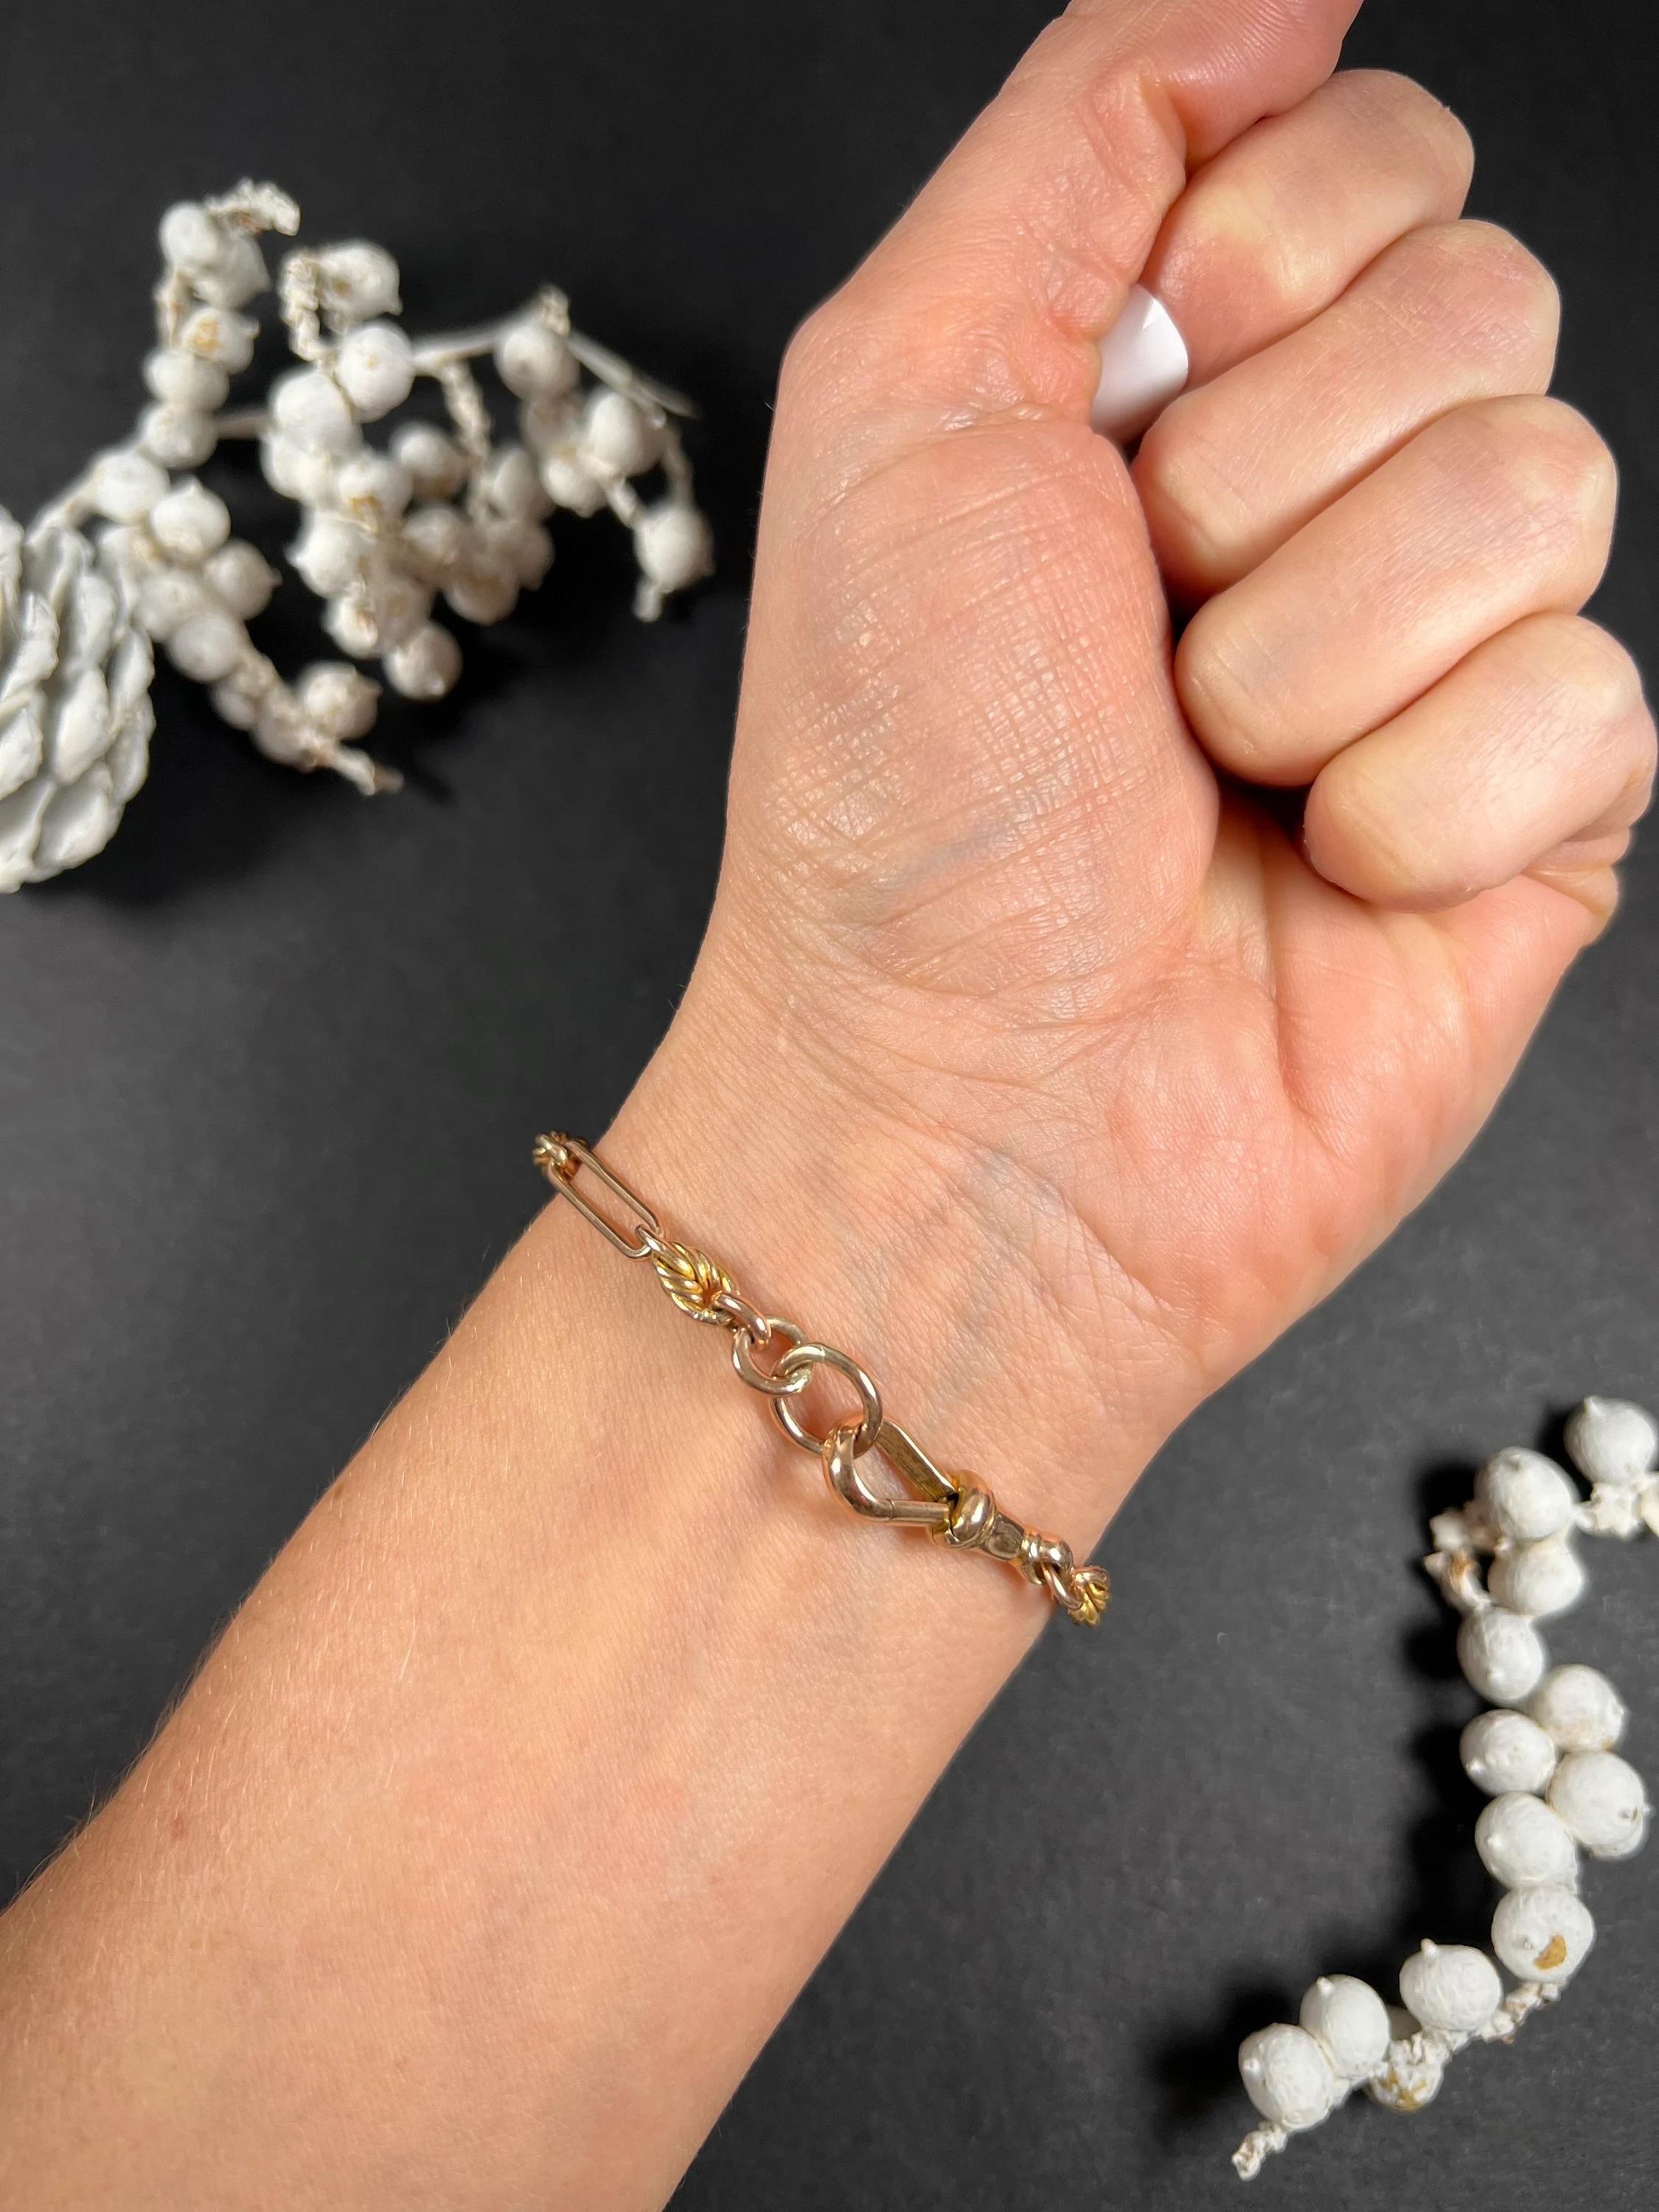 Antique Trombone Bracelet 

9ct Rose Gold Stamped

Hallmarked Birmingham 1909

This 9ct rose gold Edwardian trombone link bracelet is an exquisite piece of jewellery that is sure to capture your attention. This bracelet is crafted with the finest